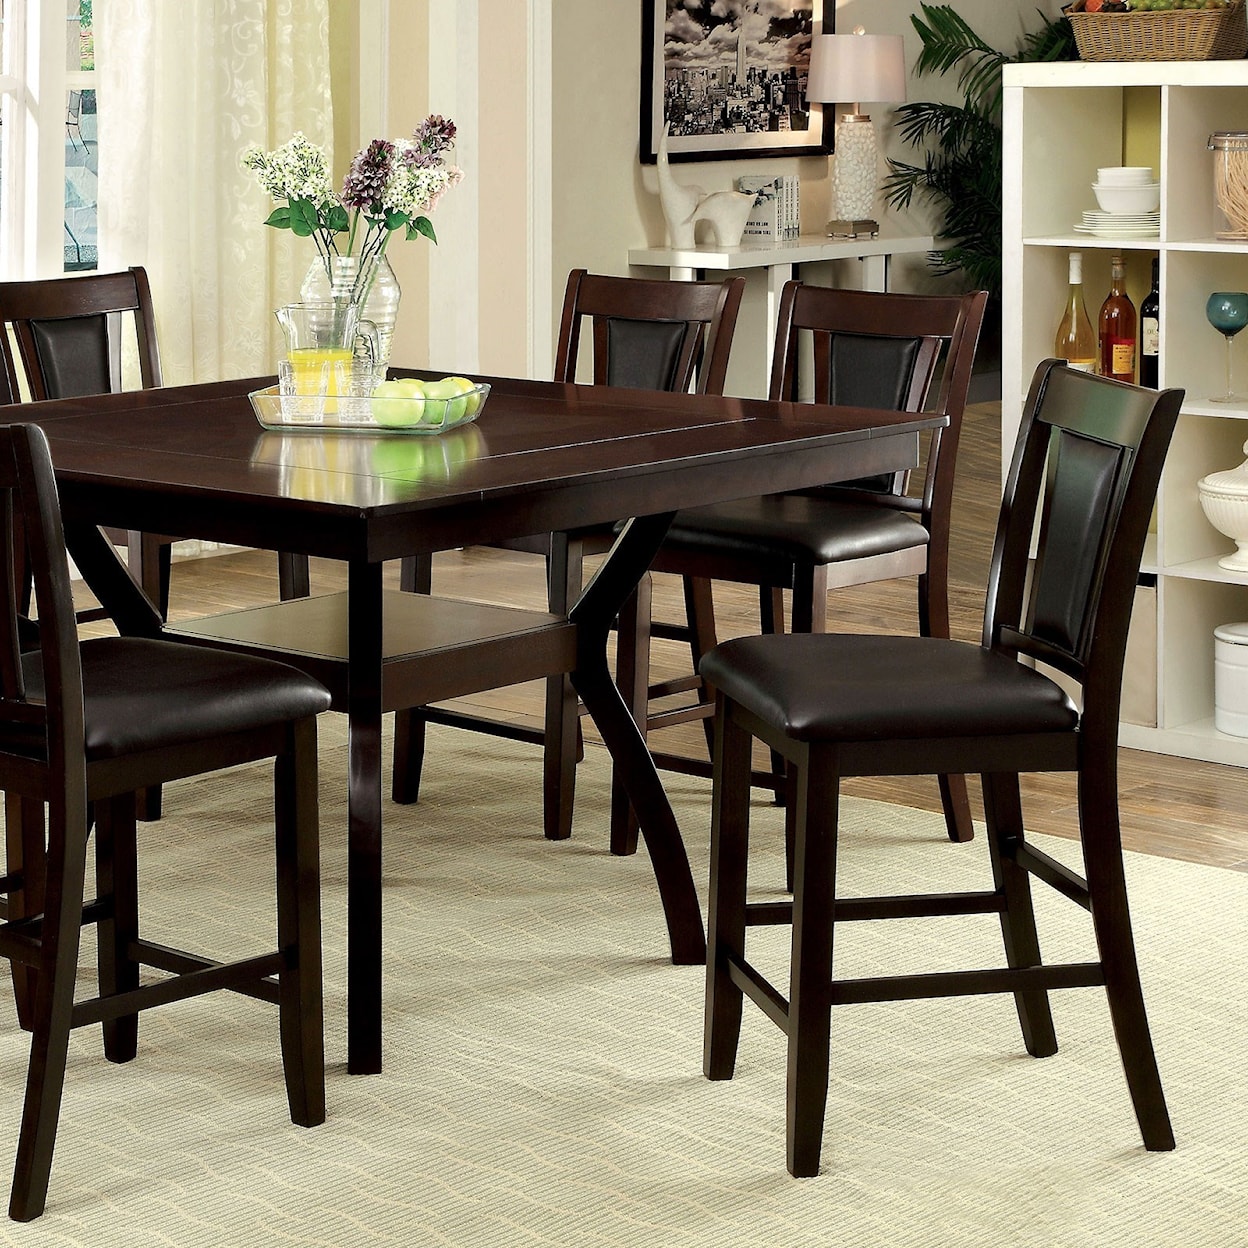 Furniture of America Brent 7 Pc Counter Height Dining Set